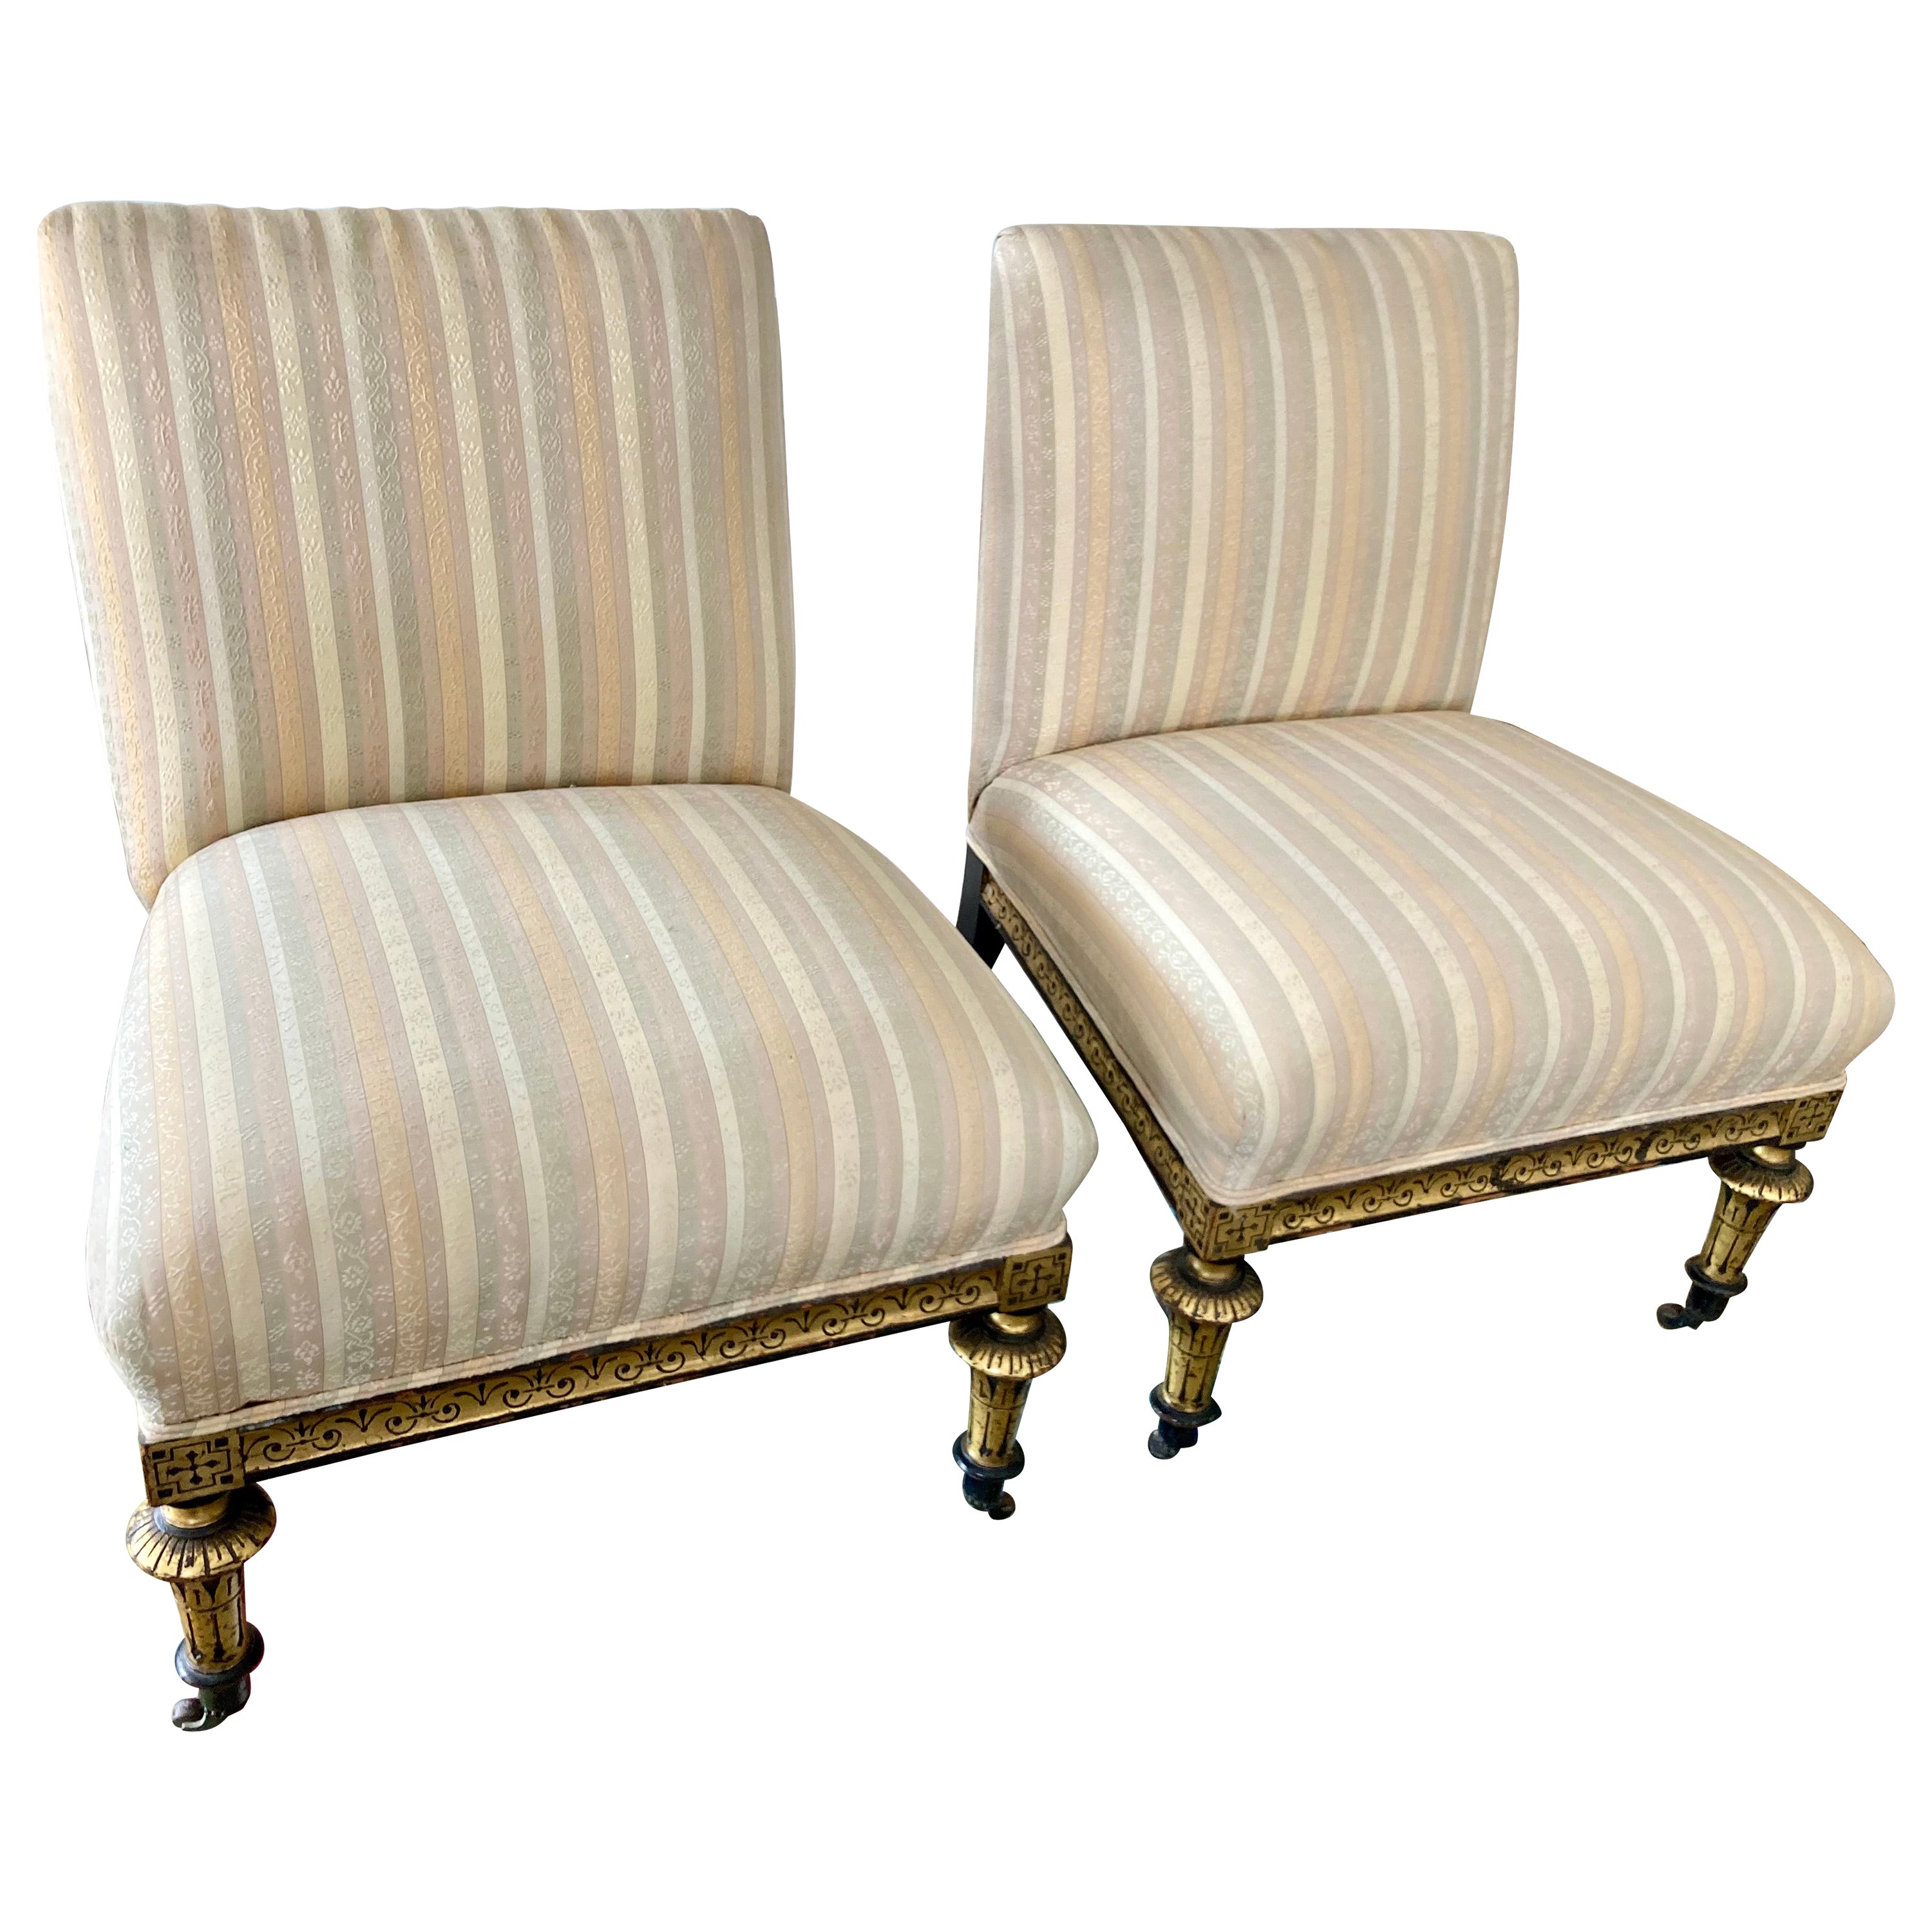 French Napoleon III Slipper Chairs Gilt Ebony Details, a Pair For Sale